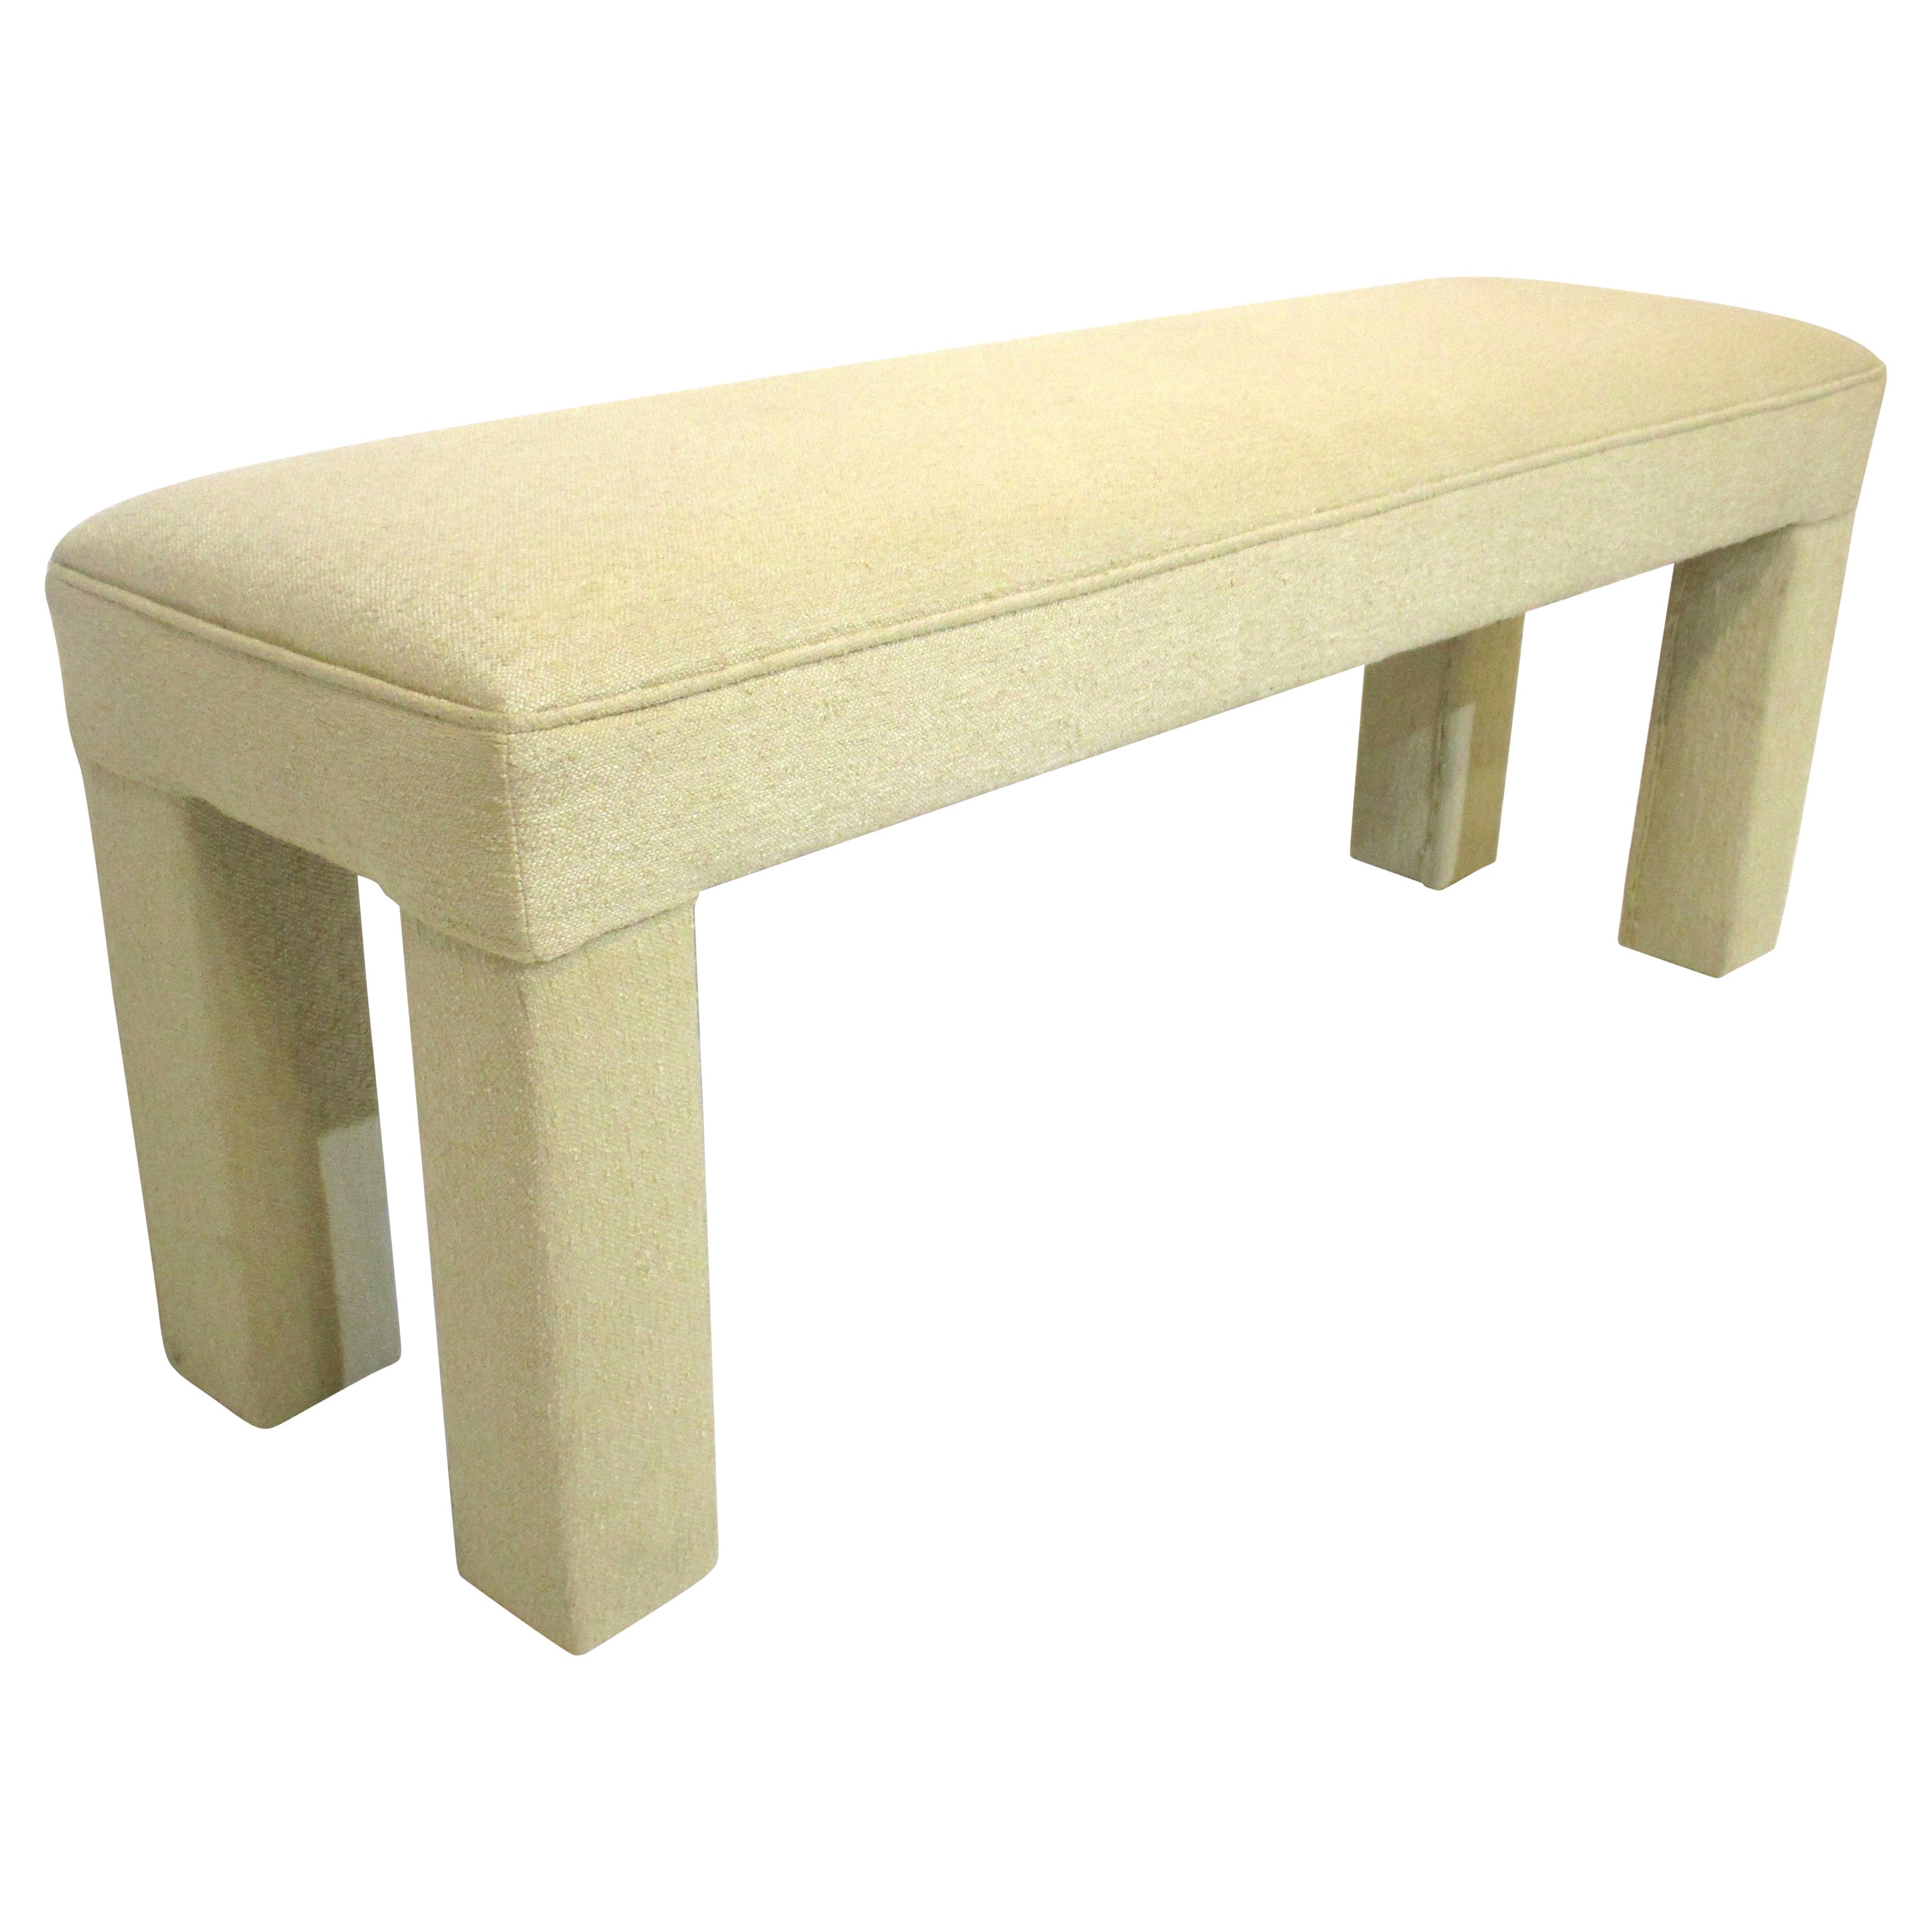 Milo Baughman Styled Upholstered Bench For Sale